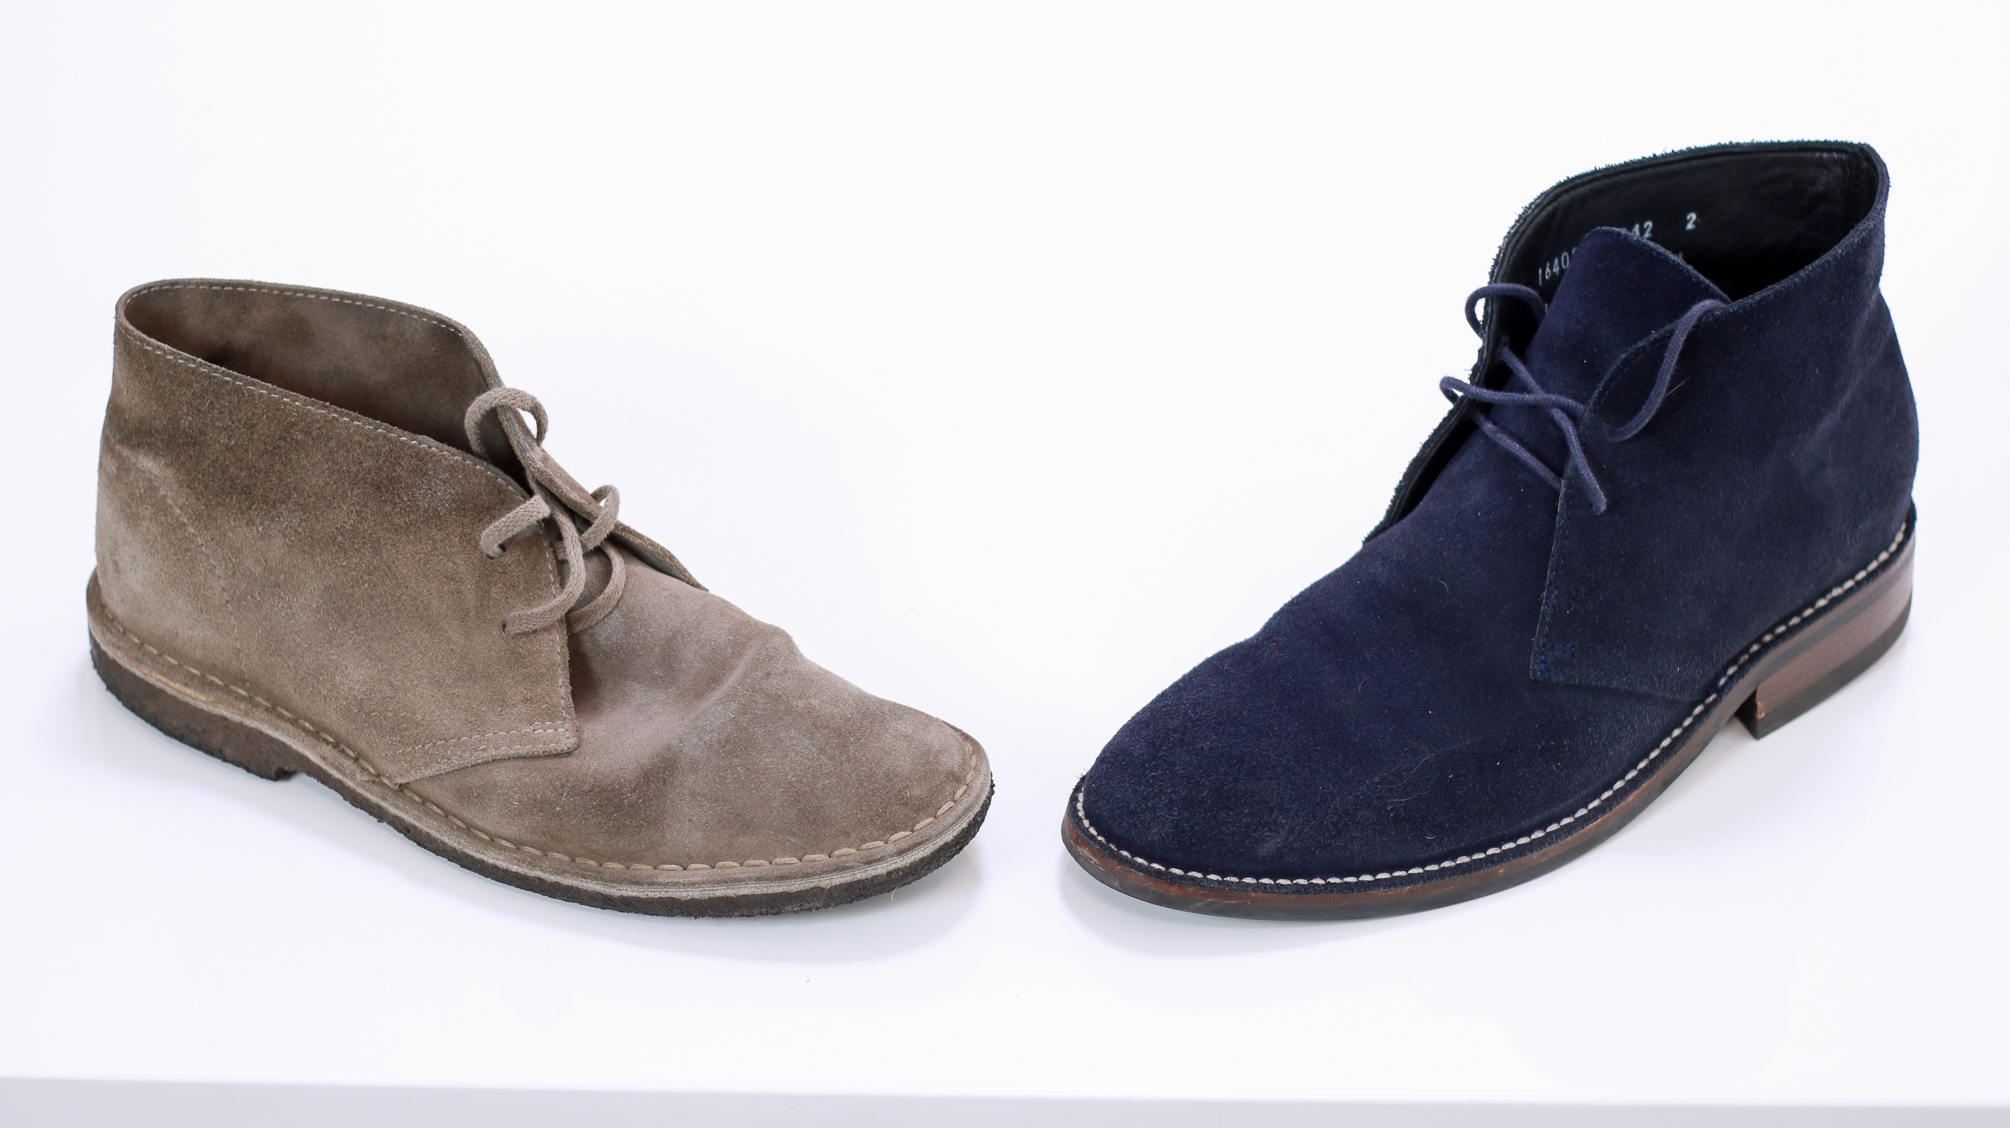 10 Best Types of Boots for Men (and My Top 3 Picks)